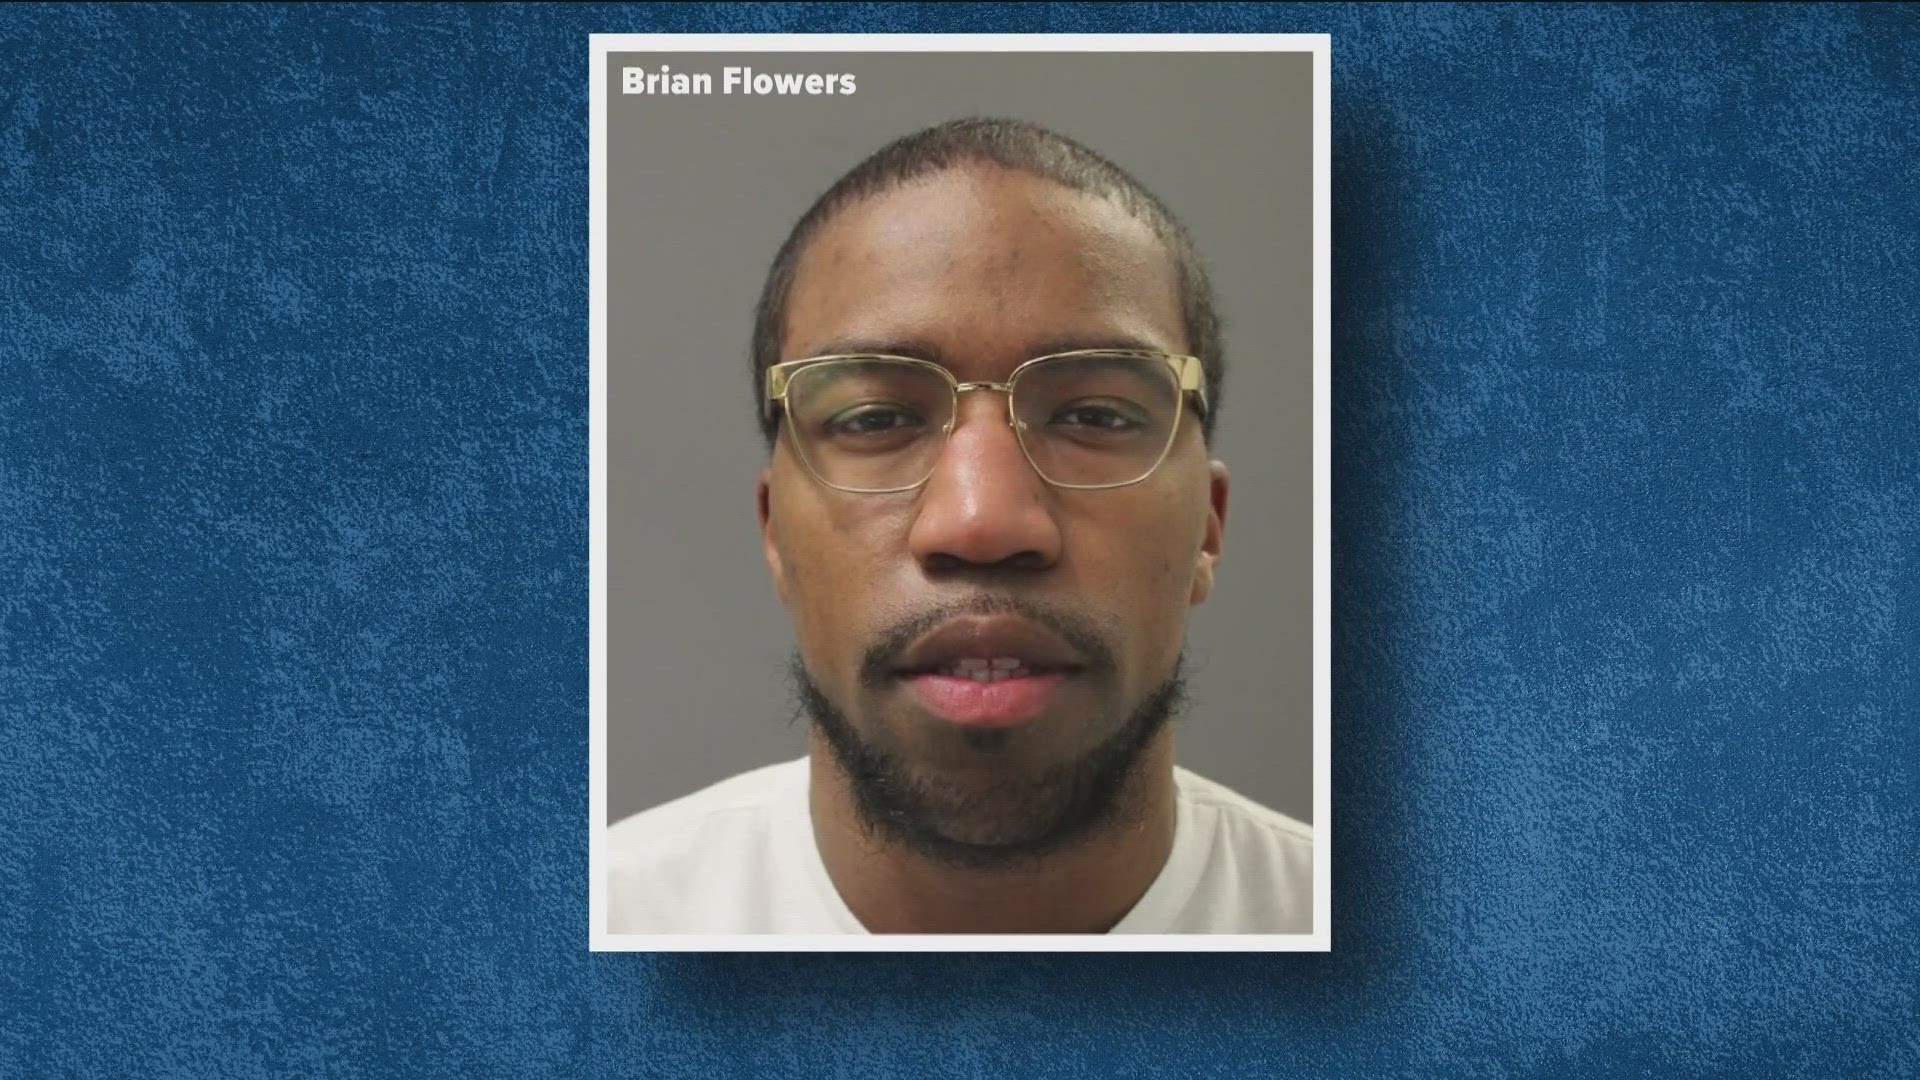 Brian Flowers, now 32, and a friend were convicted of killing Katricia Daniels and her 10-year-old son Robert in 2008.